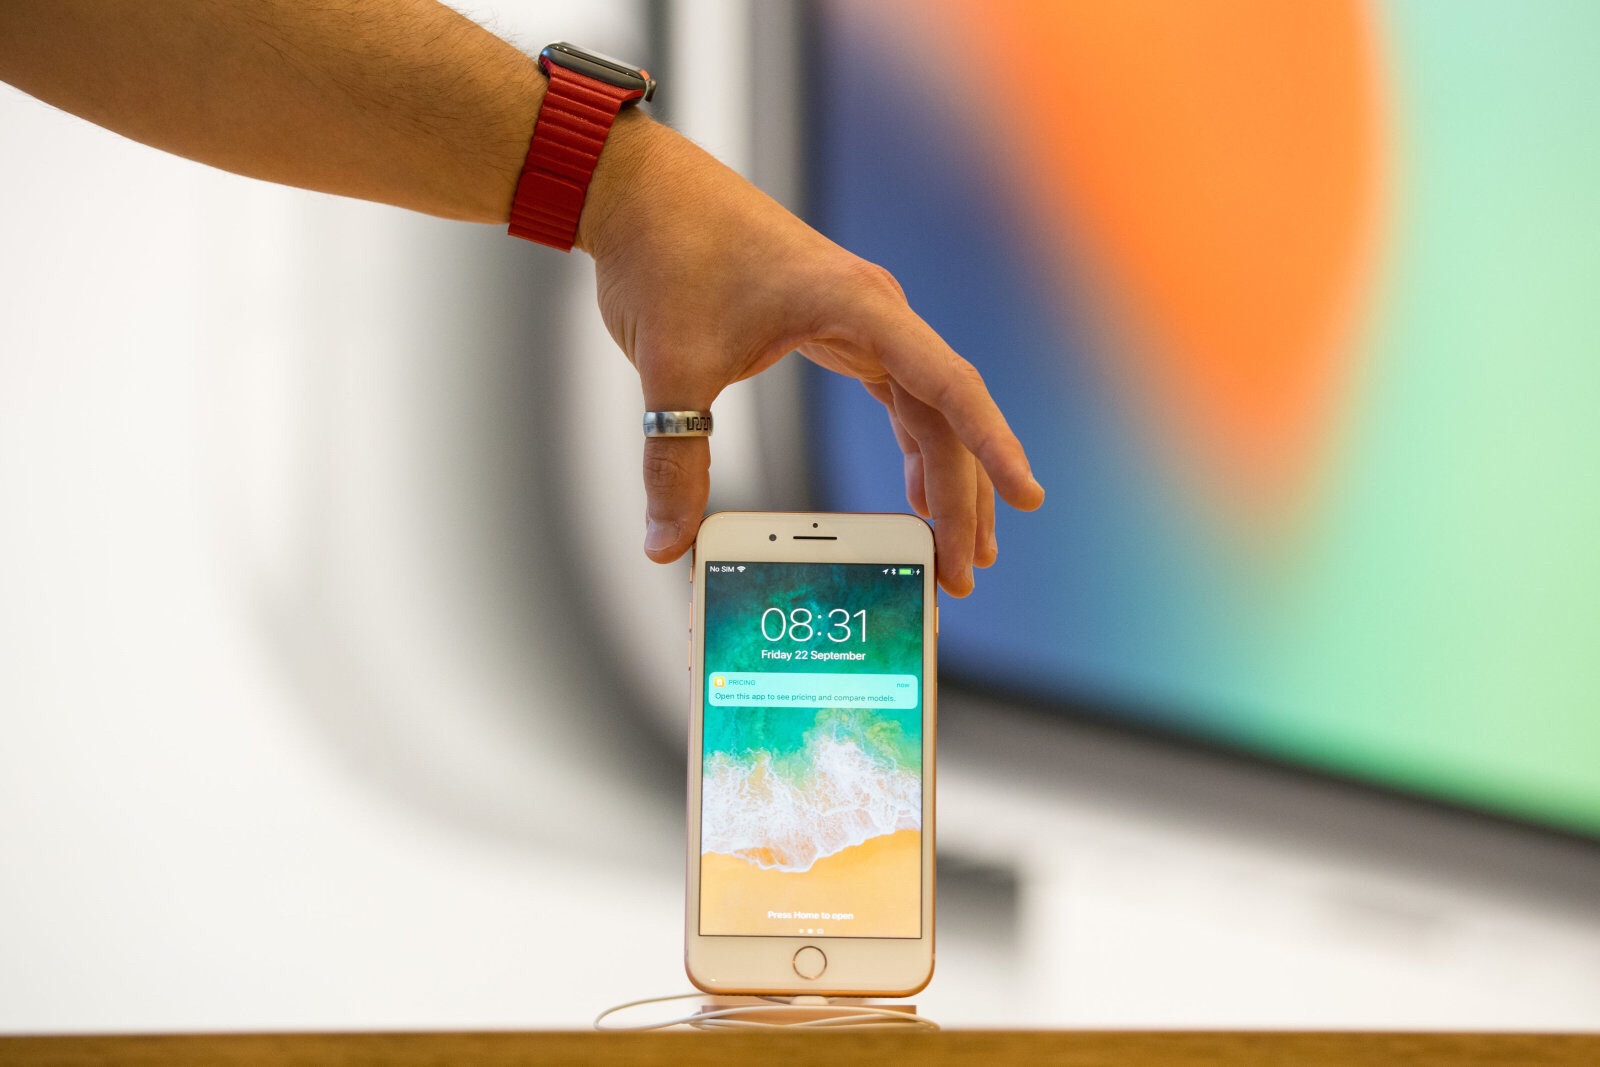 Apple seems to be exploring curved iPhone screens and ‘touchless’ gestures